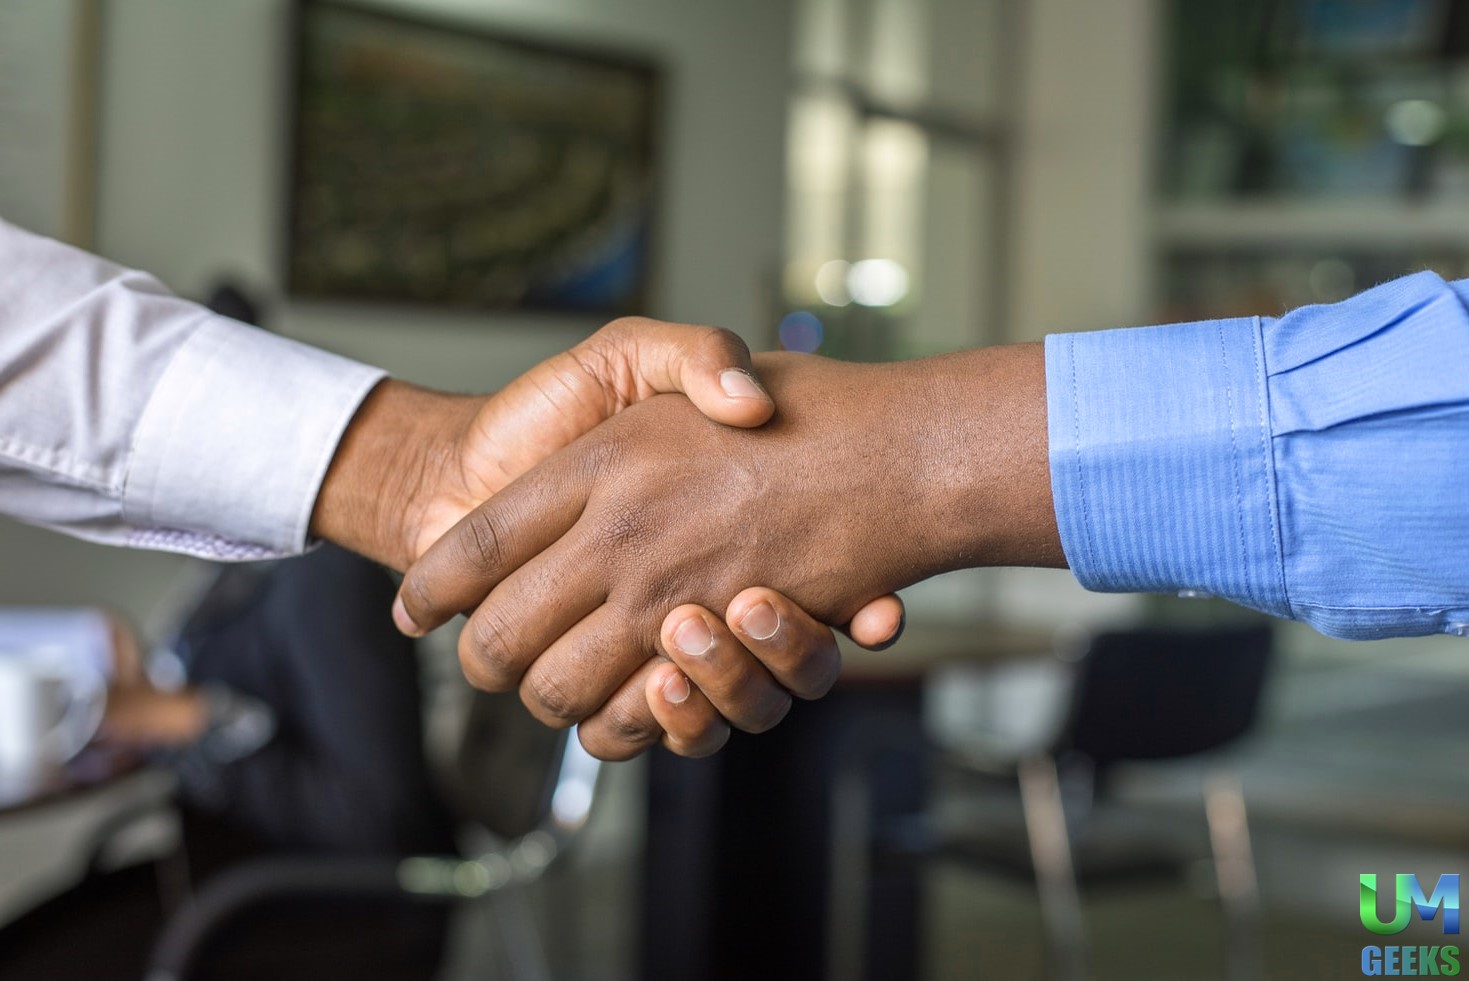 How To Choose a Good Business Partner